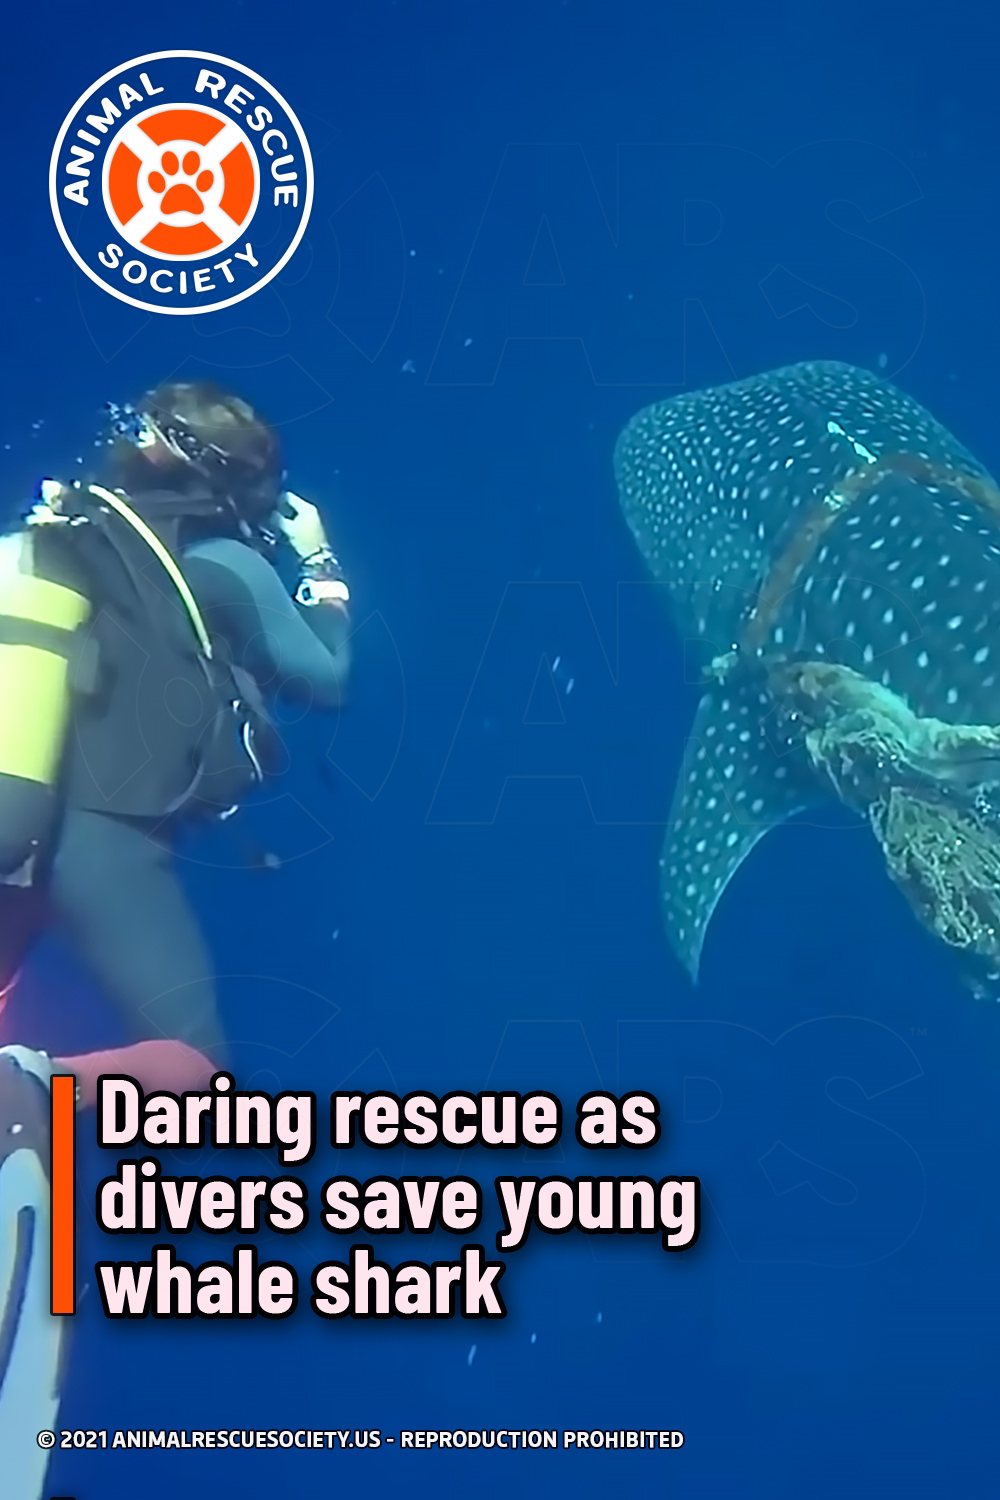 Daring rescue as divers save young whale shark